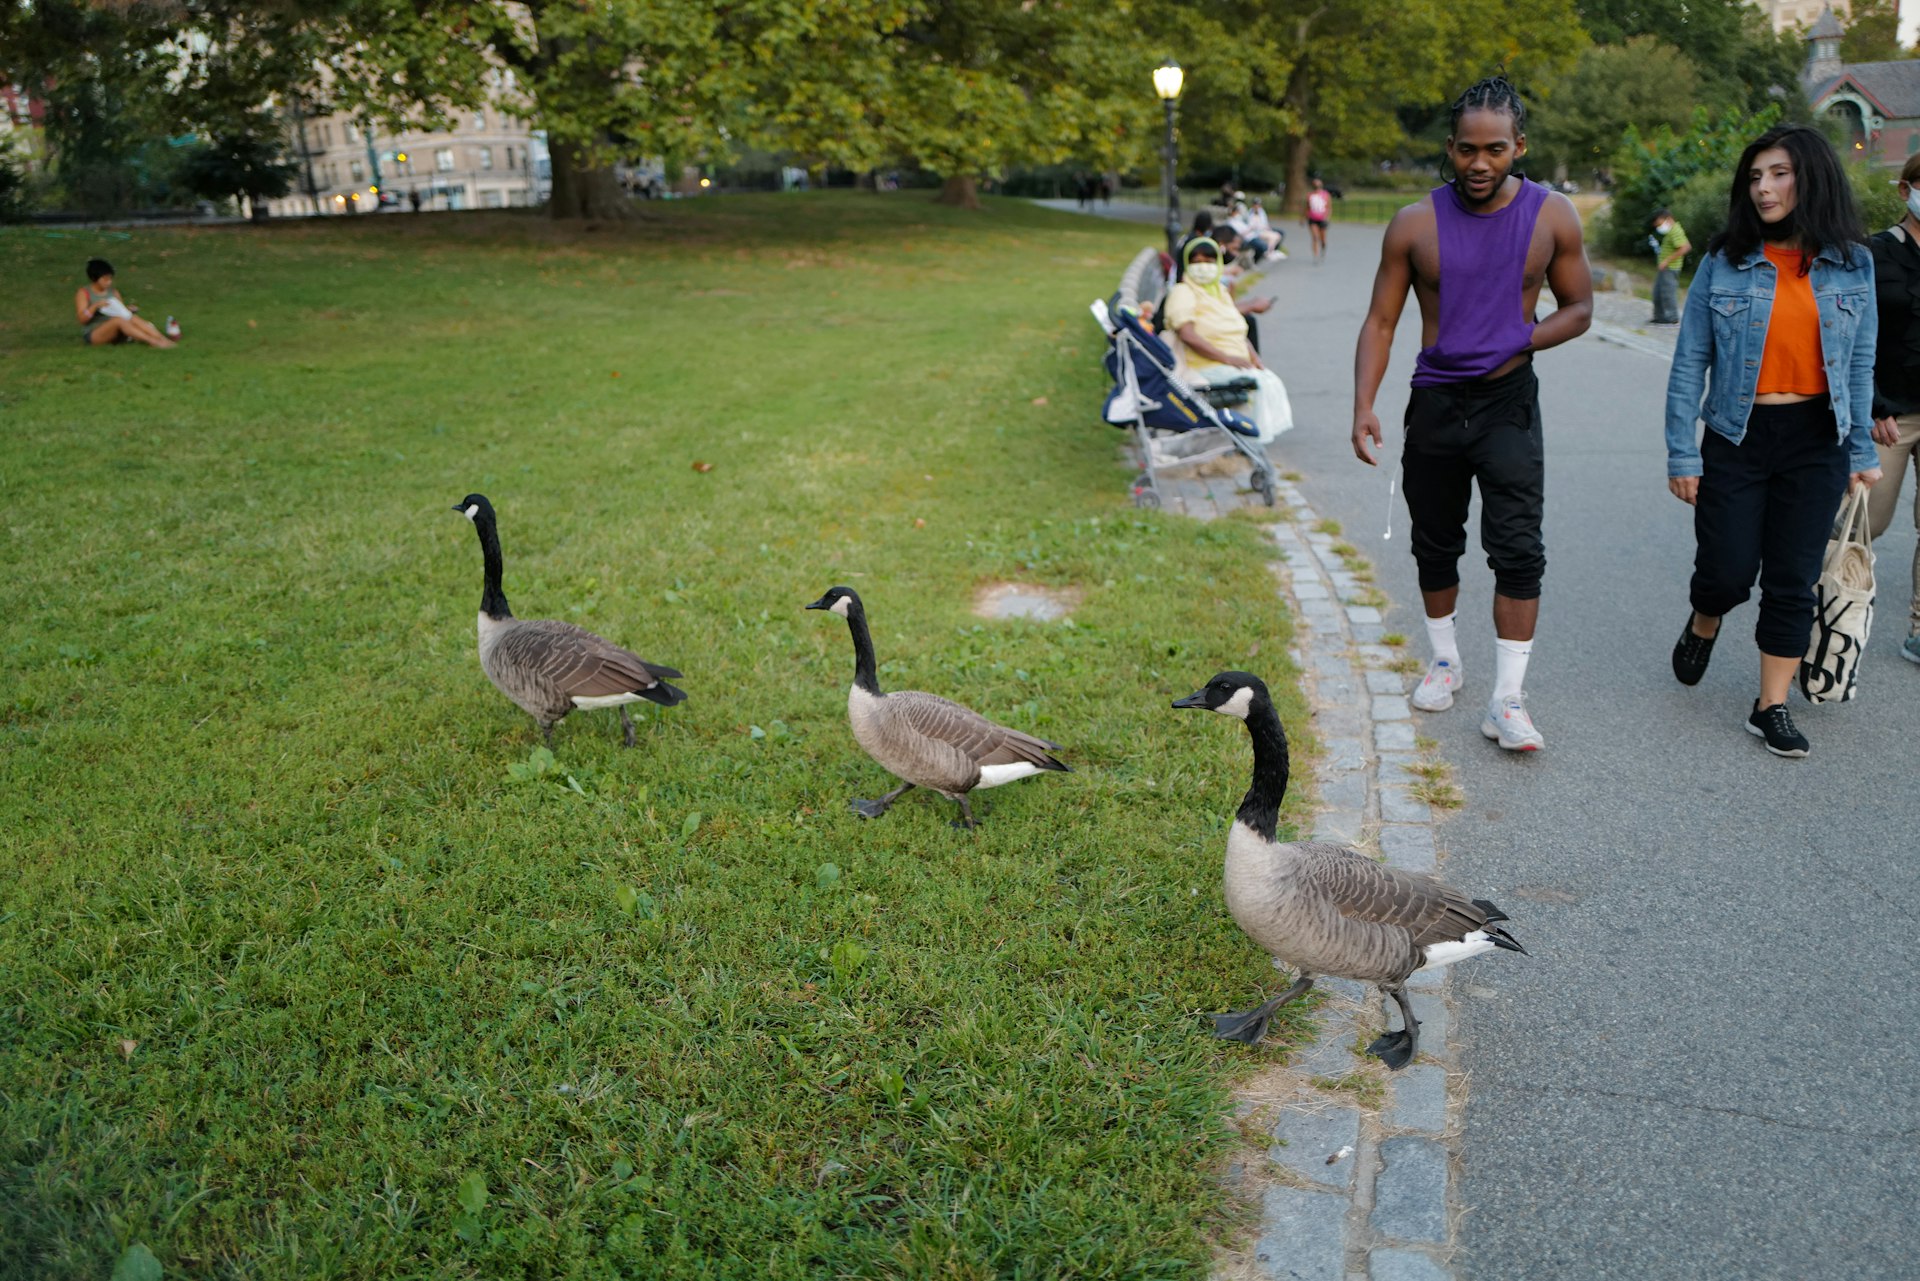 People walk by Canada geese at Harlem Meer, Central Park, New York City, New York, USA